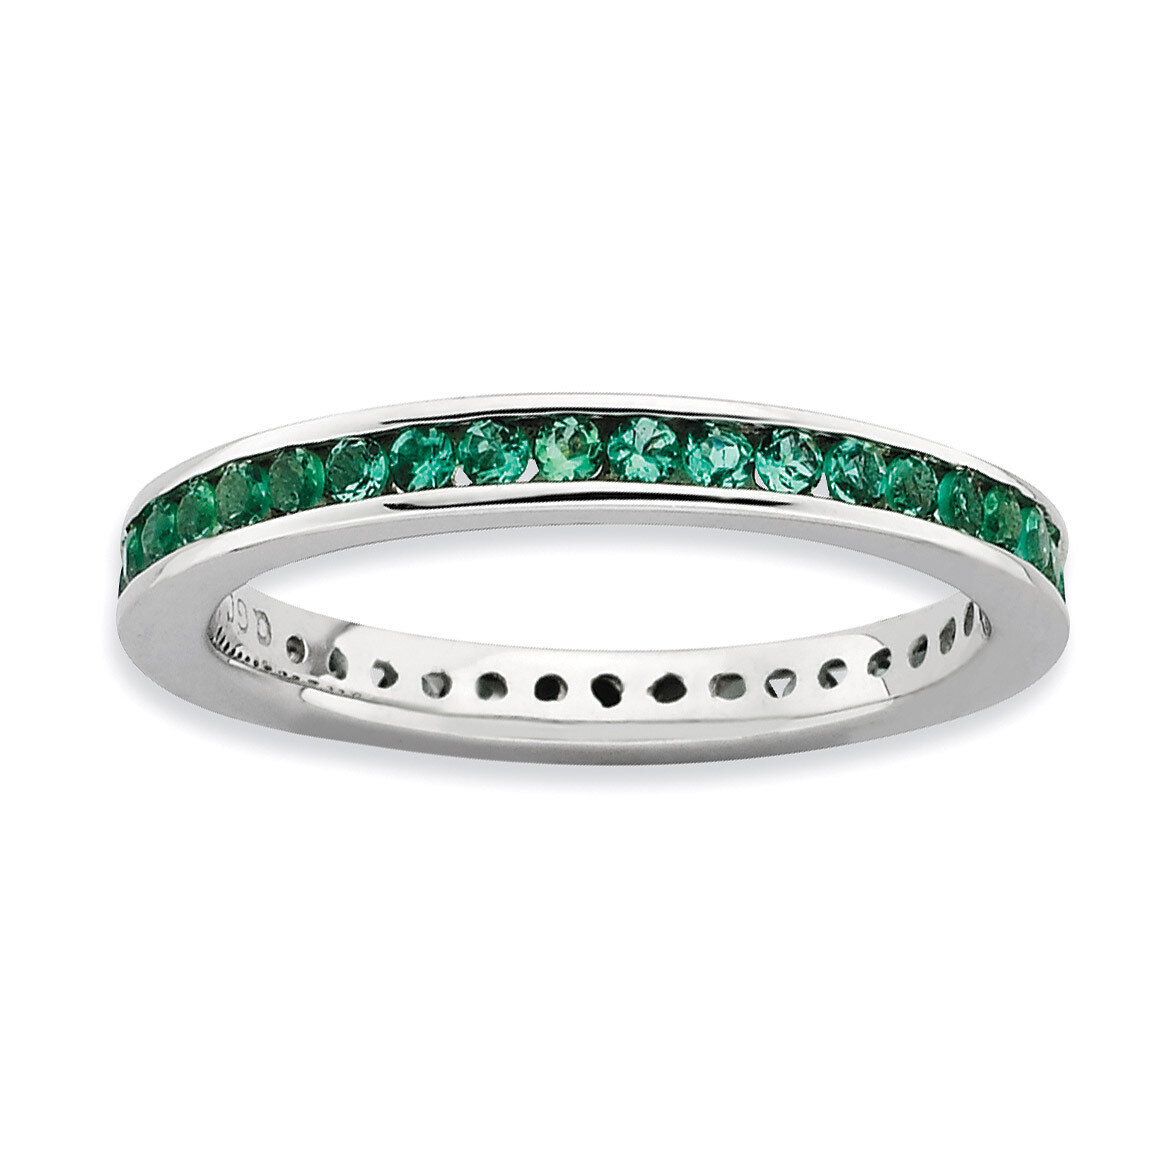 Stackable Expressions Polished Created Emerald Ring Sterling Silver QSK661-10